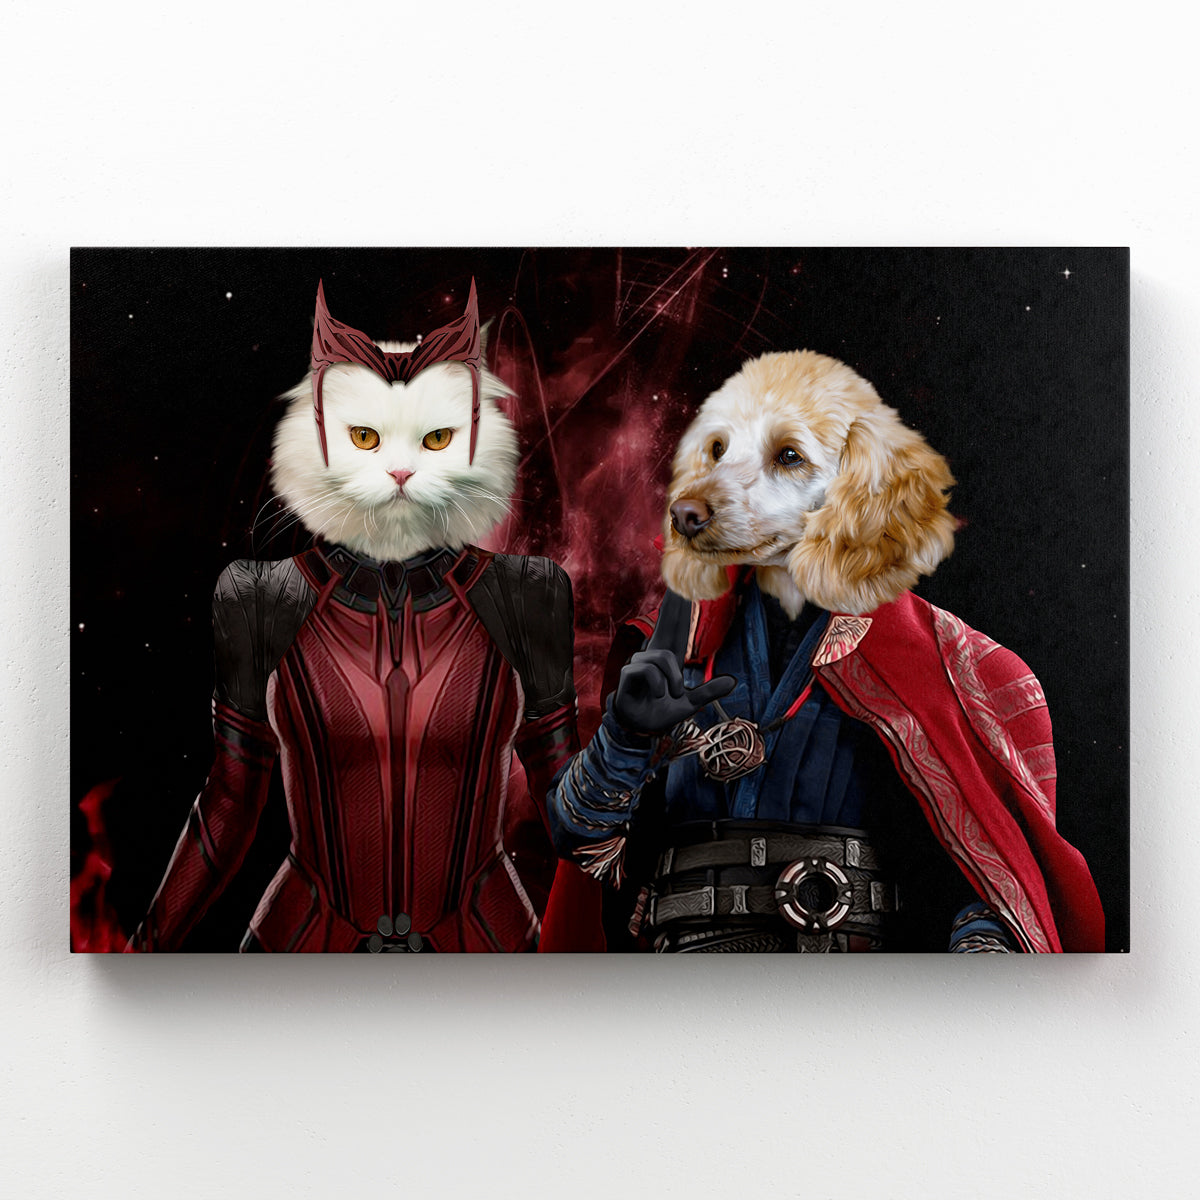 Thor & Wanda, Paw & Glory, paw and glory, for pet portraits, painting of your dog, professional pet photos, best dog paintings, animal portrait pictures, hogwarts dog houses, pet portrait